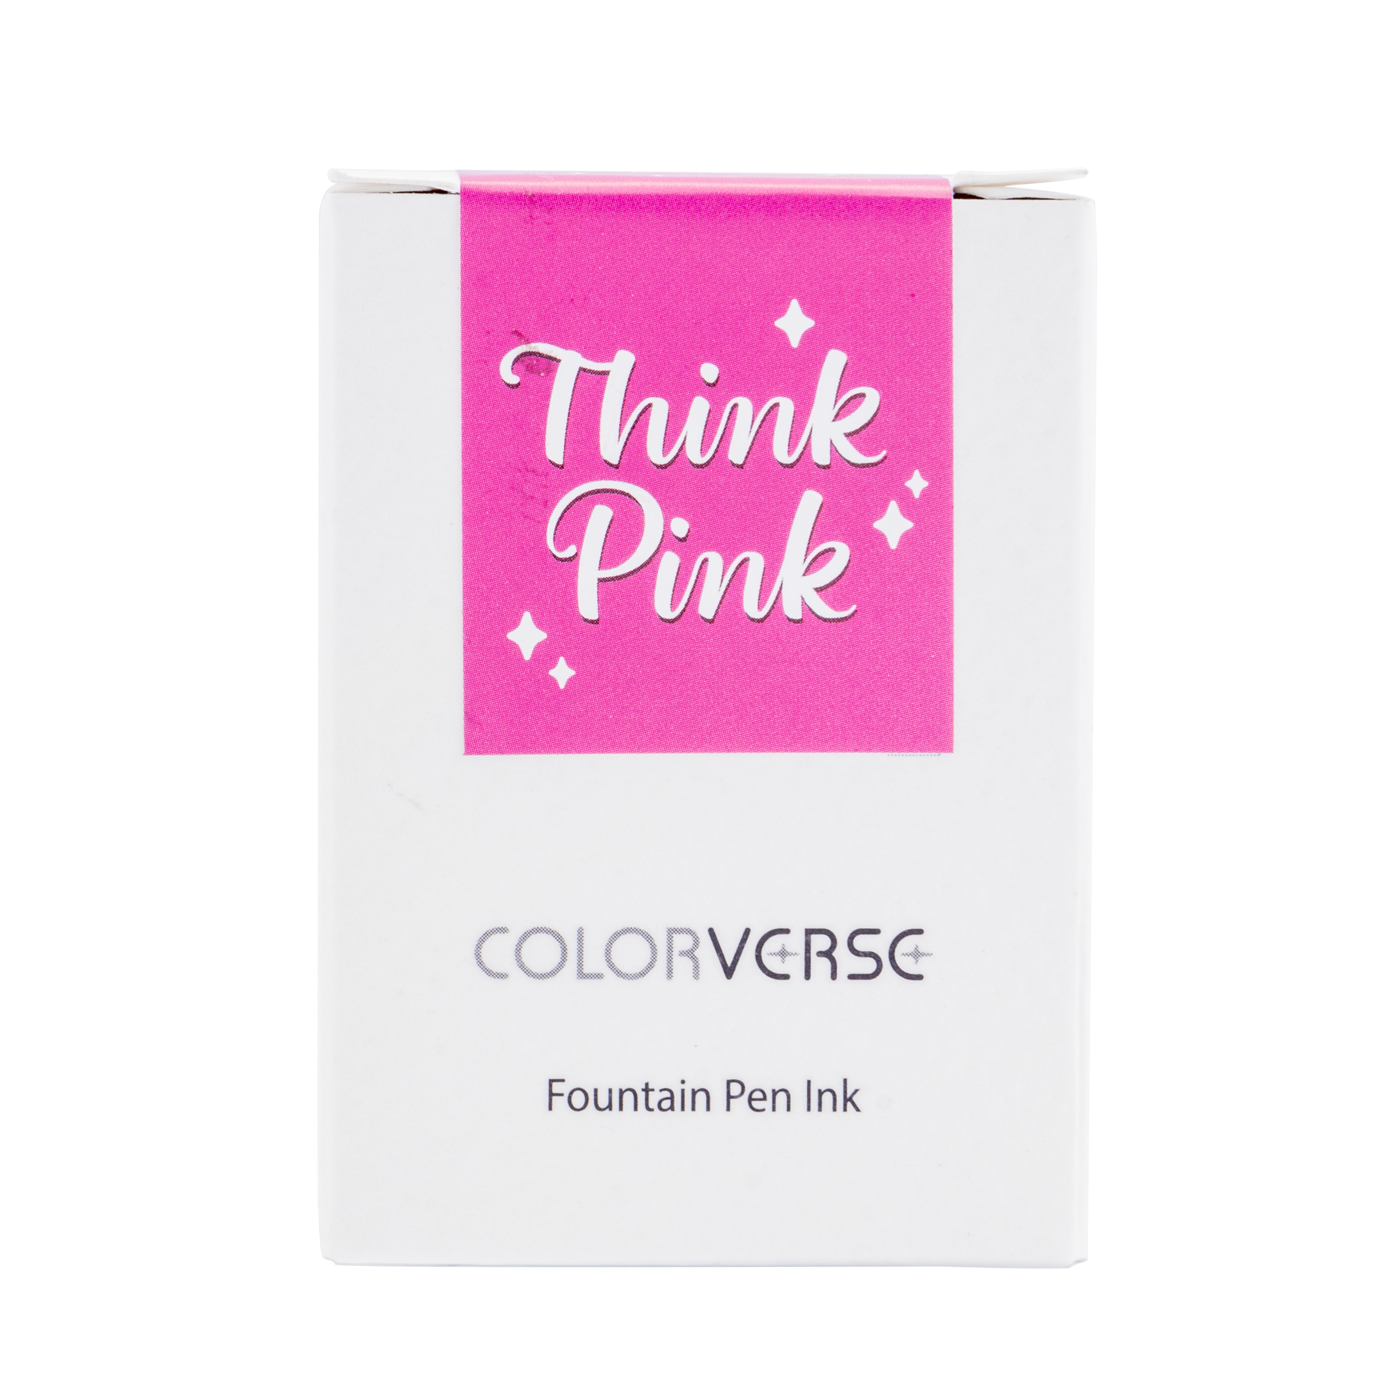 Colorverse Think Pink - Vanness